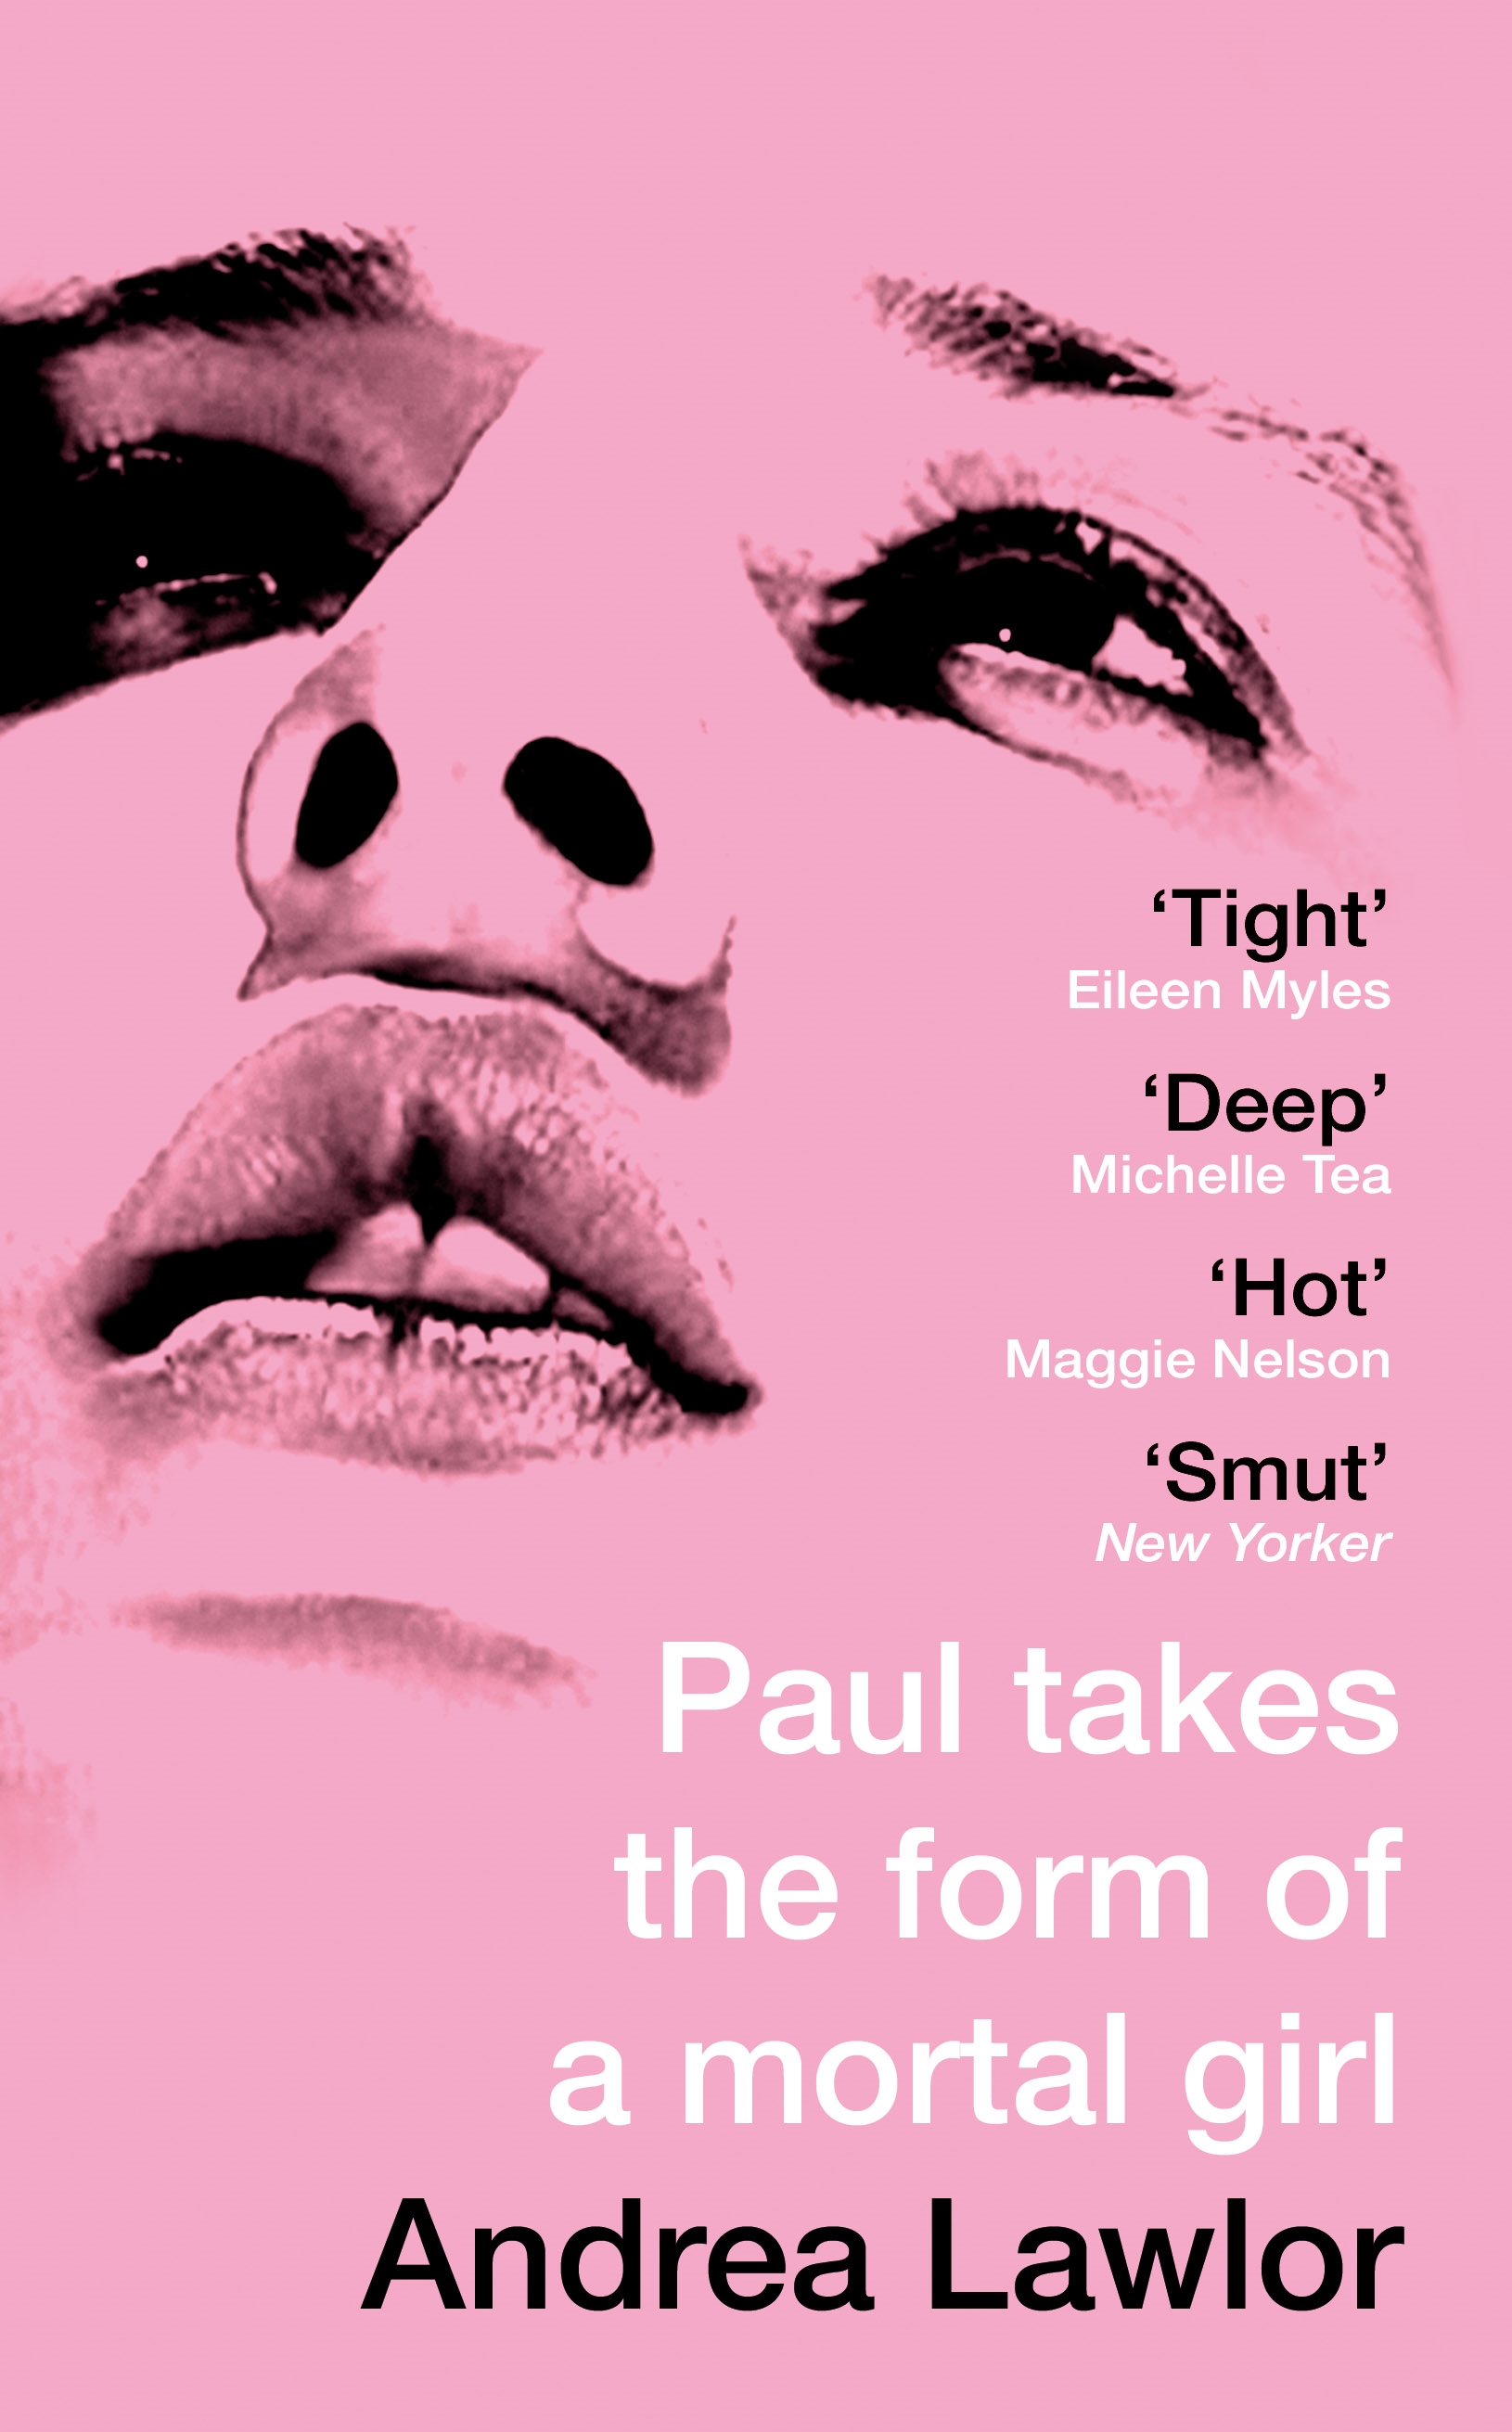 music-drives-gender-play-novel-paul-takes-the-form-of-a-mortal-girl